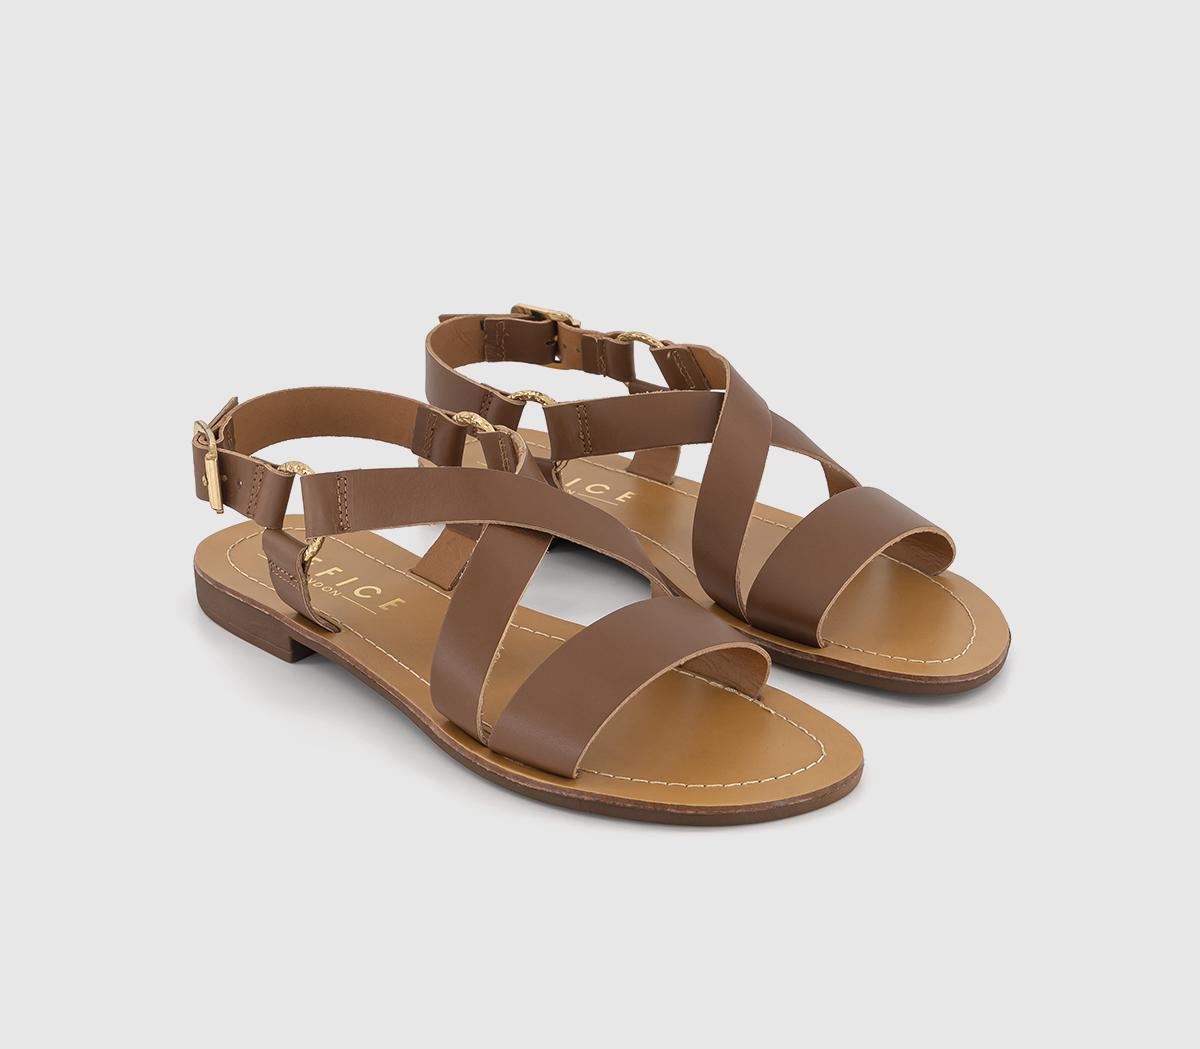 OFFICE Womens Sequence Cross Over Flat Sandals Tan Leather, 7